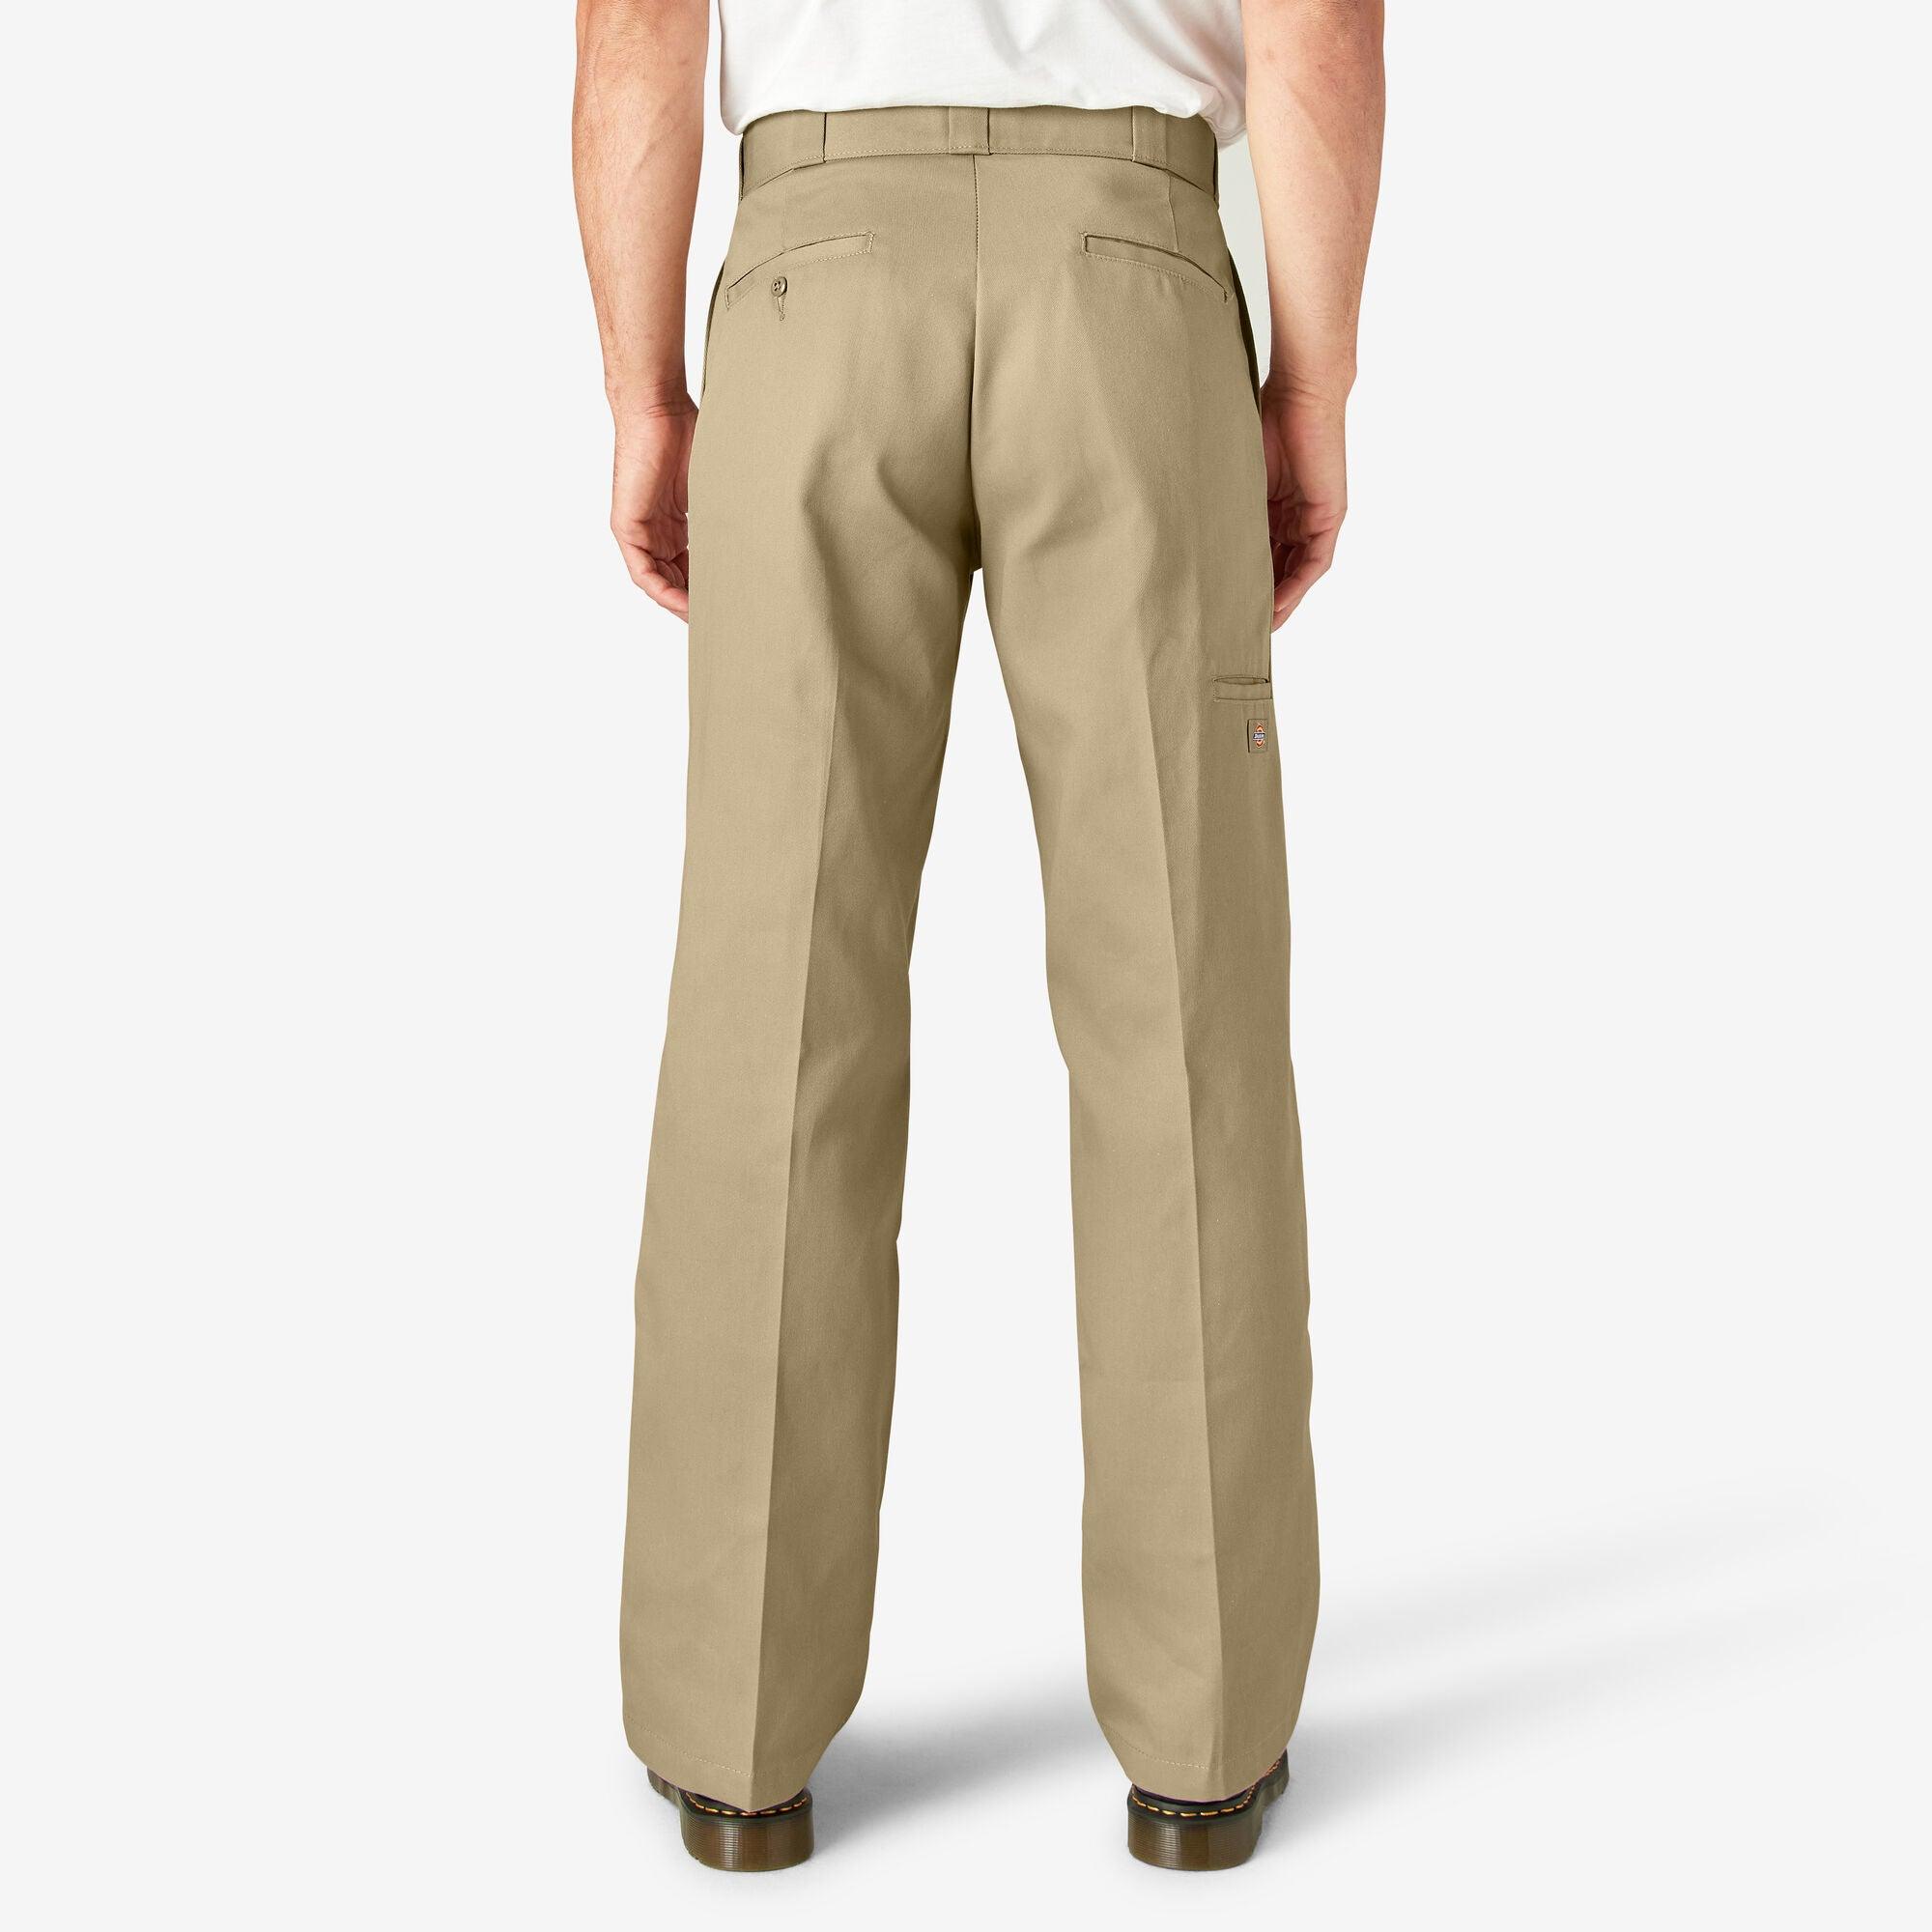 Loose Fit Double Knee Work Pants, Khaki - Purpose-Built / Home of the Trades